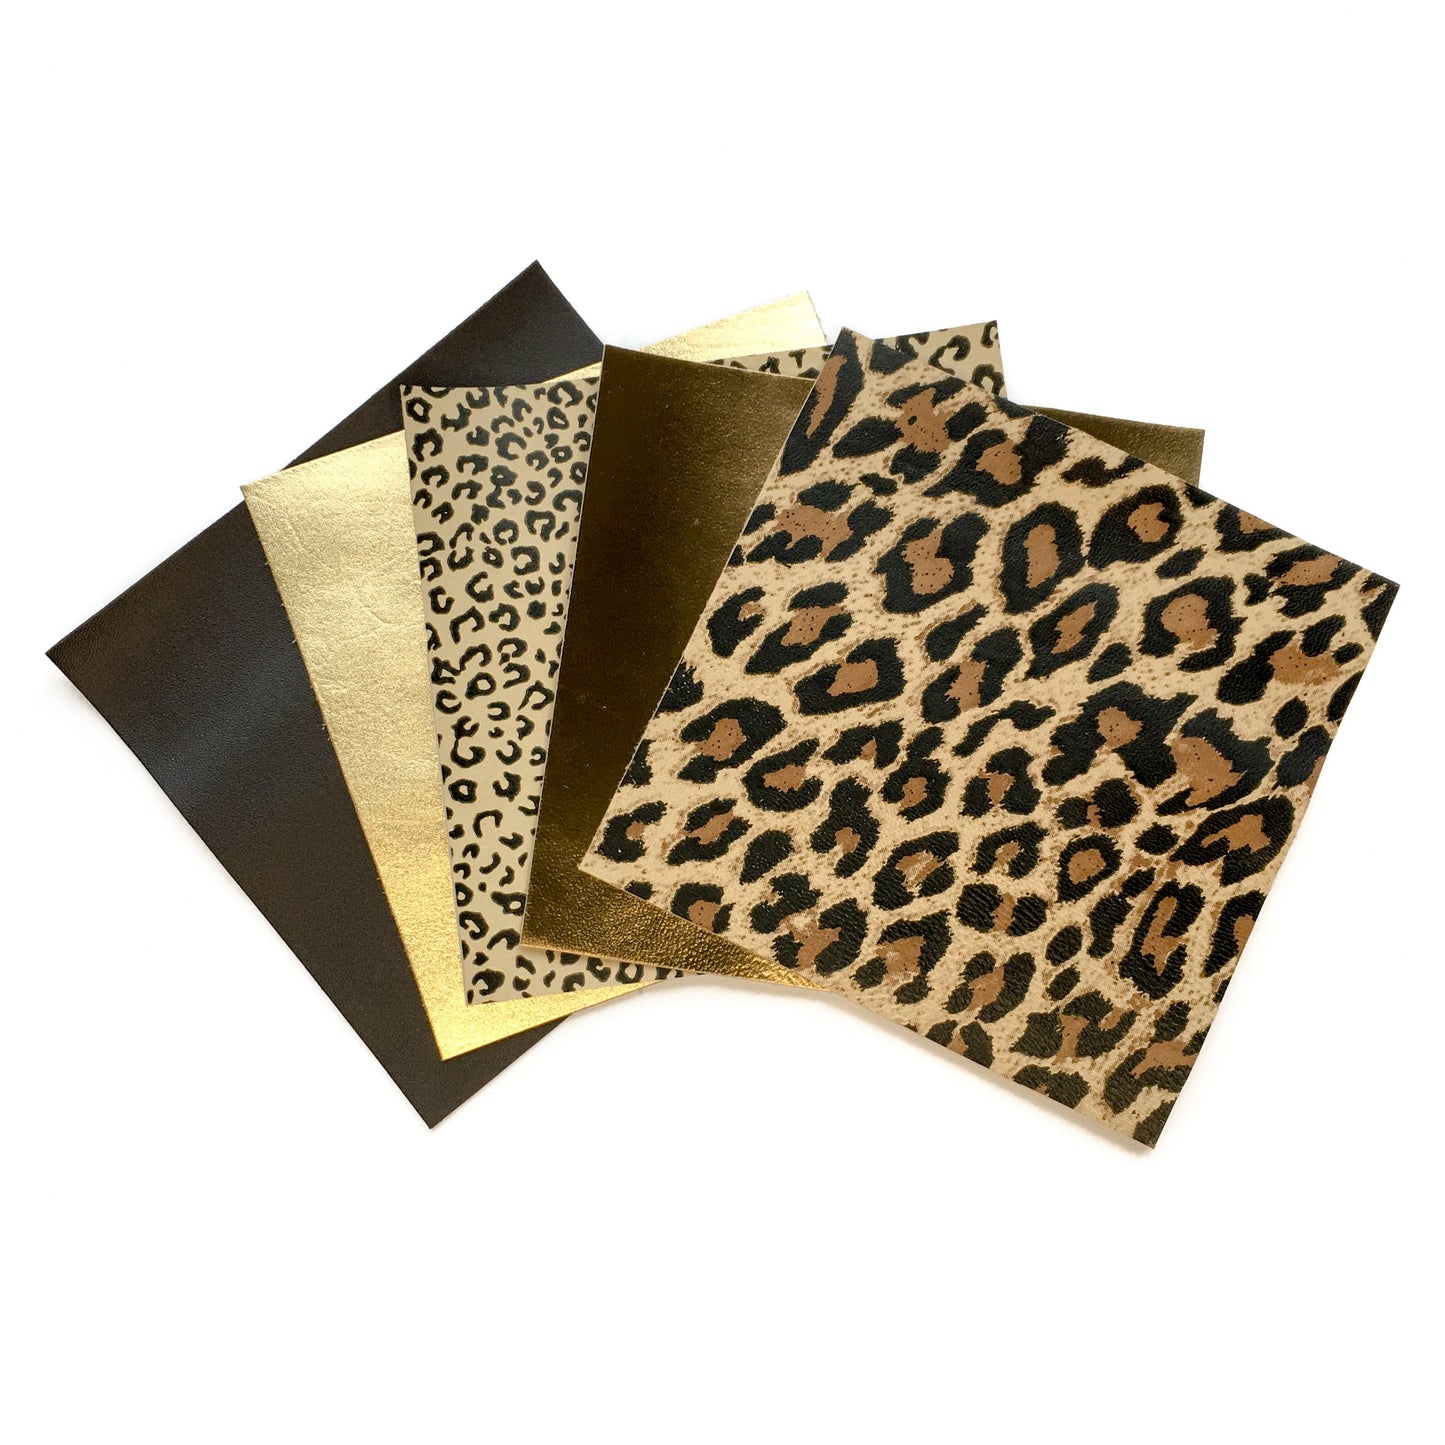 Five Leather Pieces -Gold, Leopard, Cheetah, Bronze, Brown 5x5in